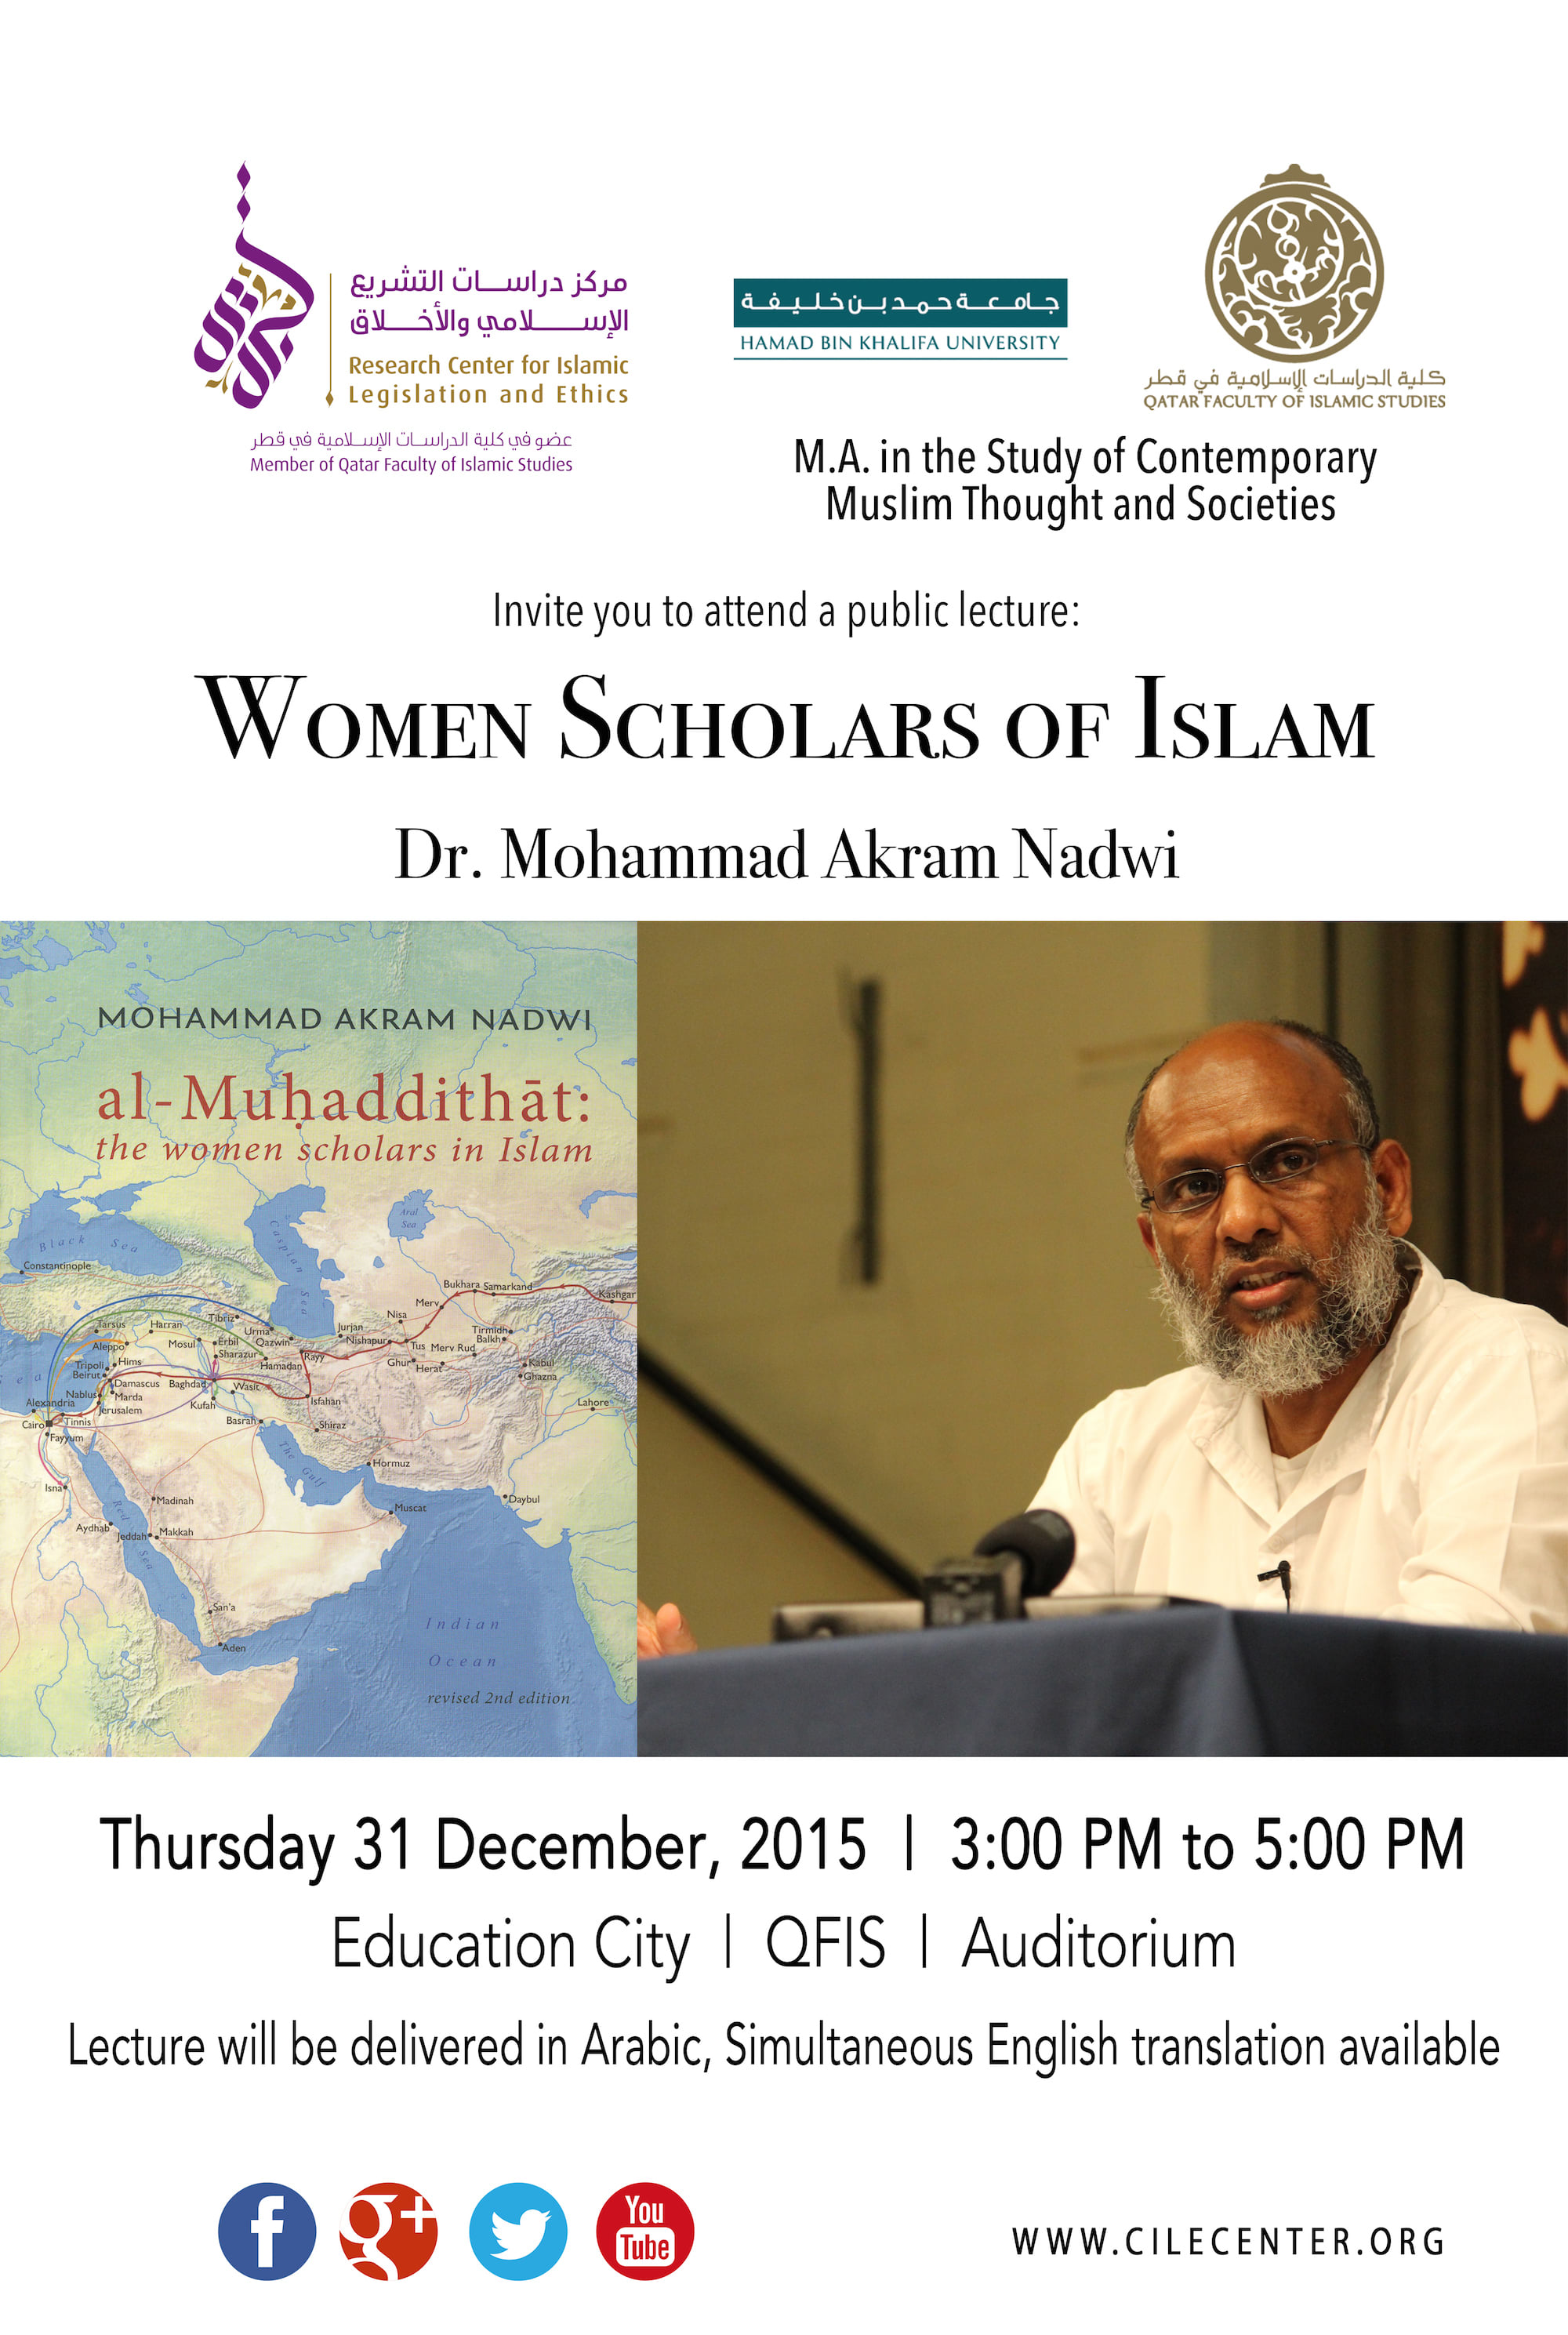 Public Lecture: Dr Mohammad Akram Nadwi "Women Scholars of Islam"